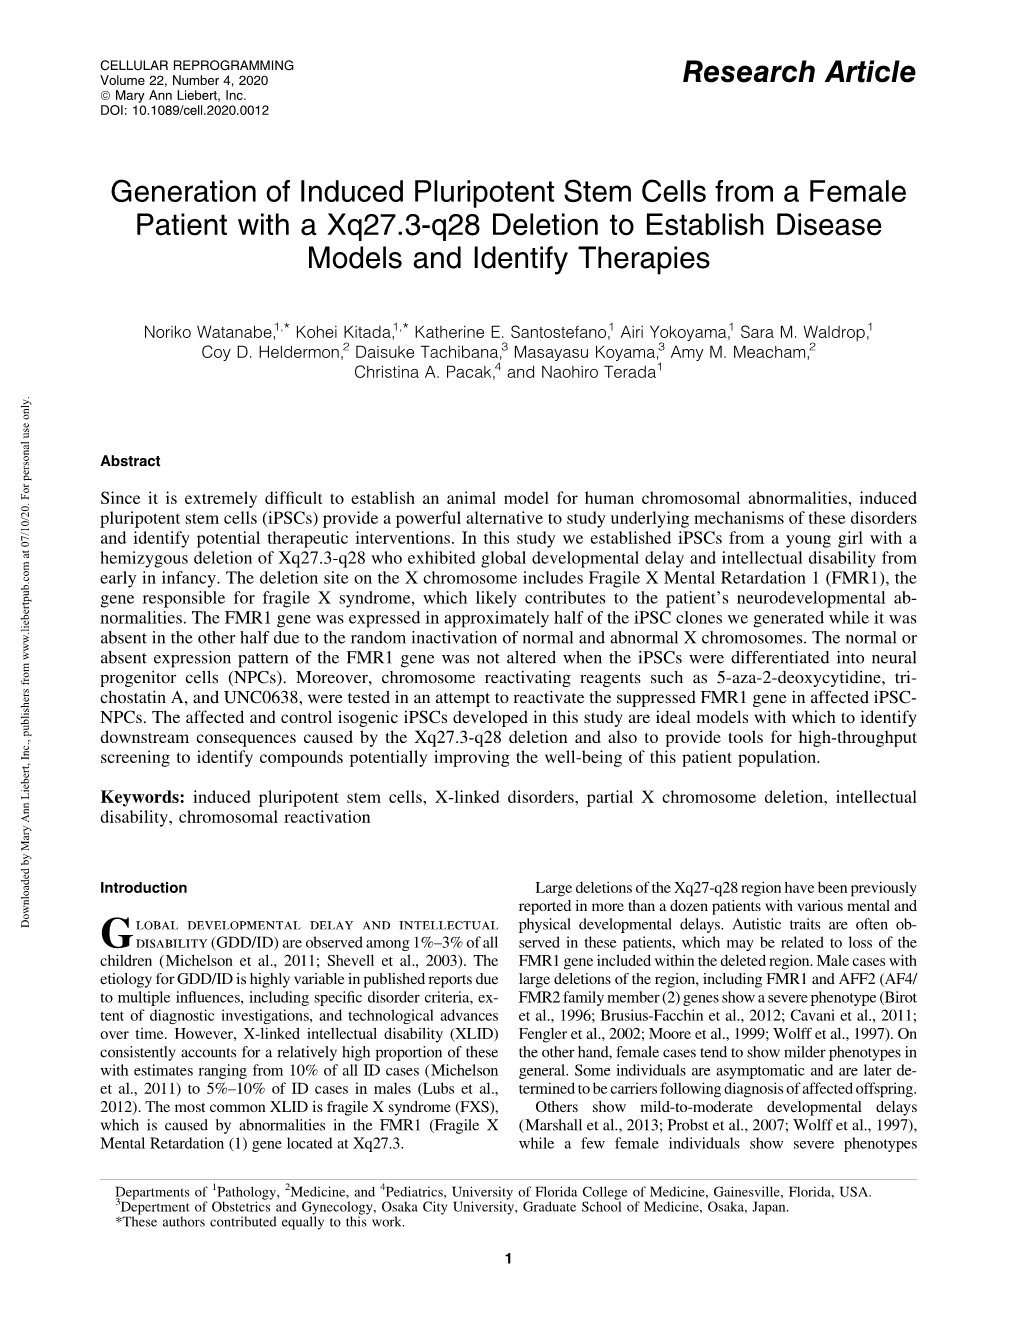 Generation of Induced Pluripotent Stem Cells from a Female Patient with a Xq27.3-Q28 Deletion to Establish Disease Models and Identify Therapies